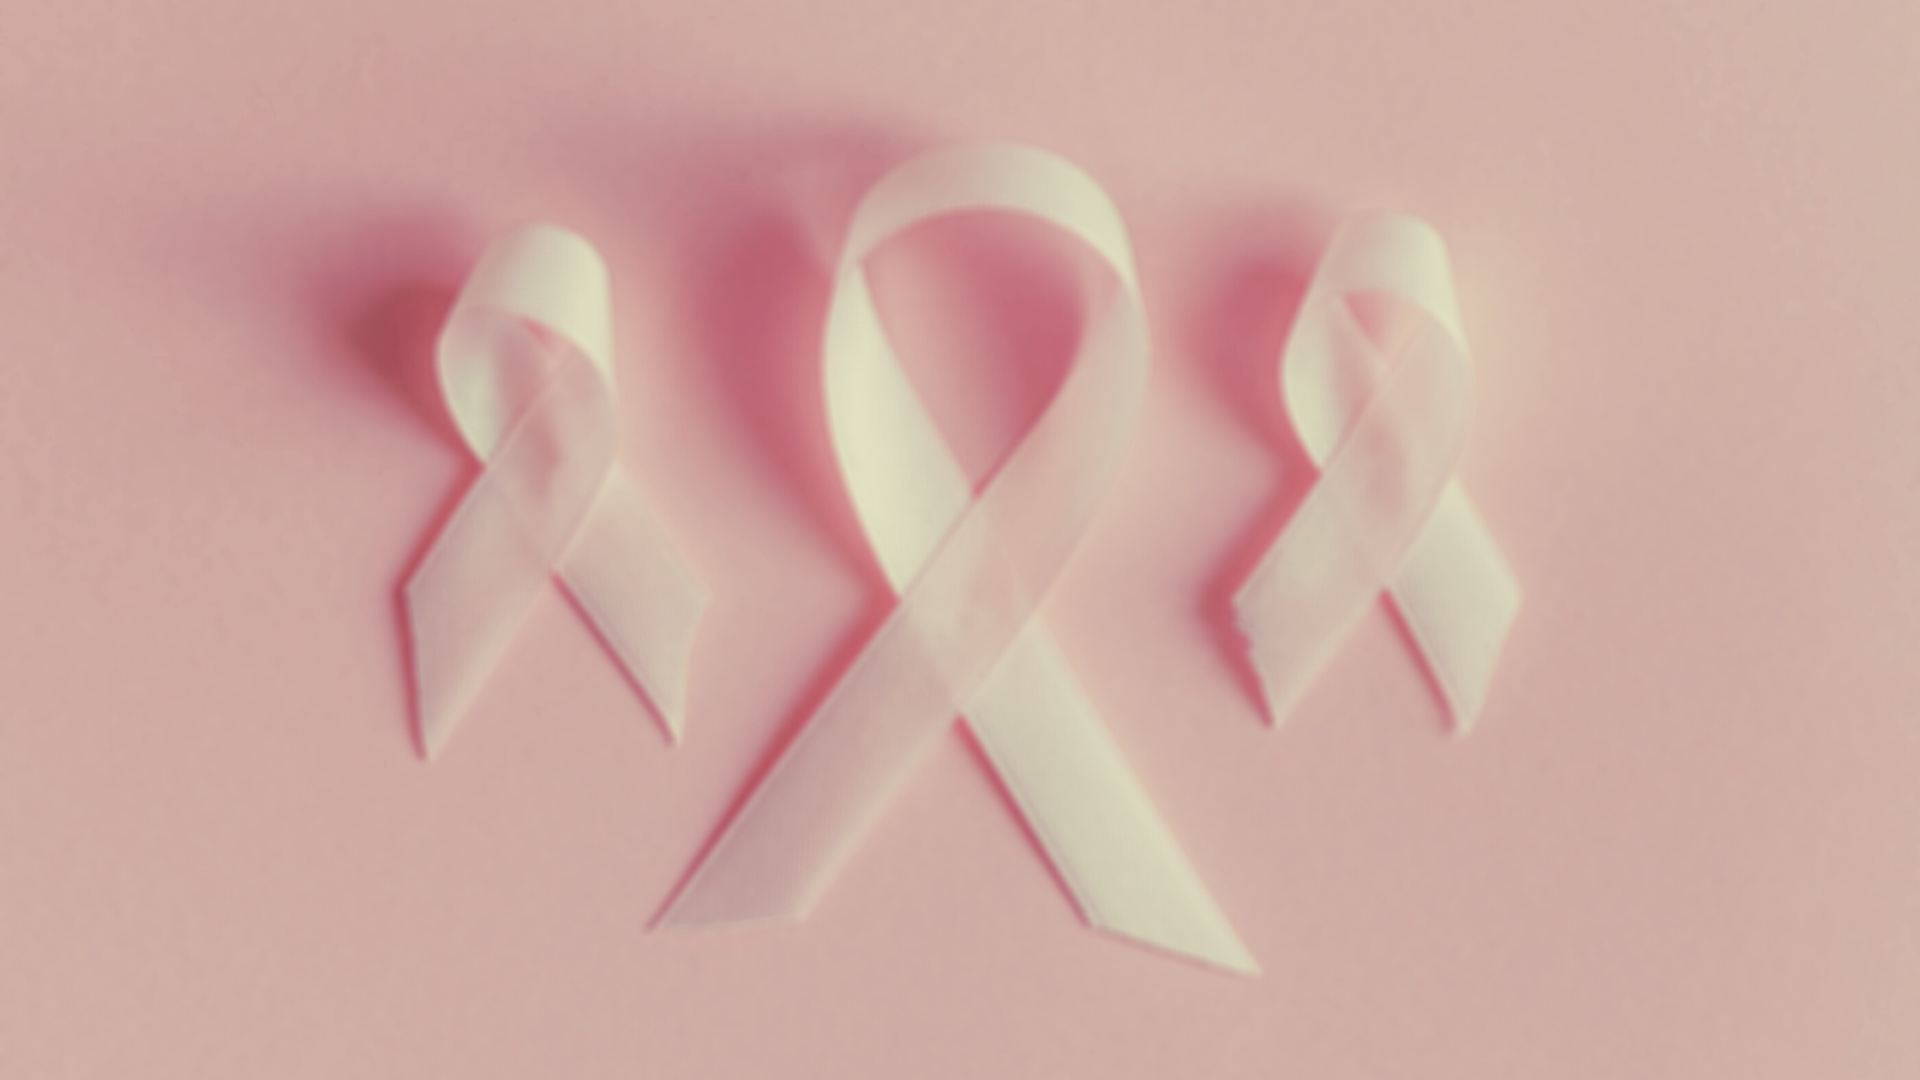 Questions about Breast Cancer